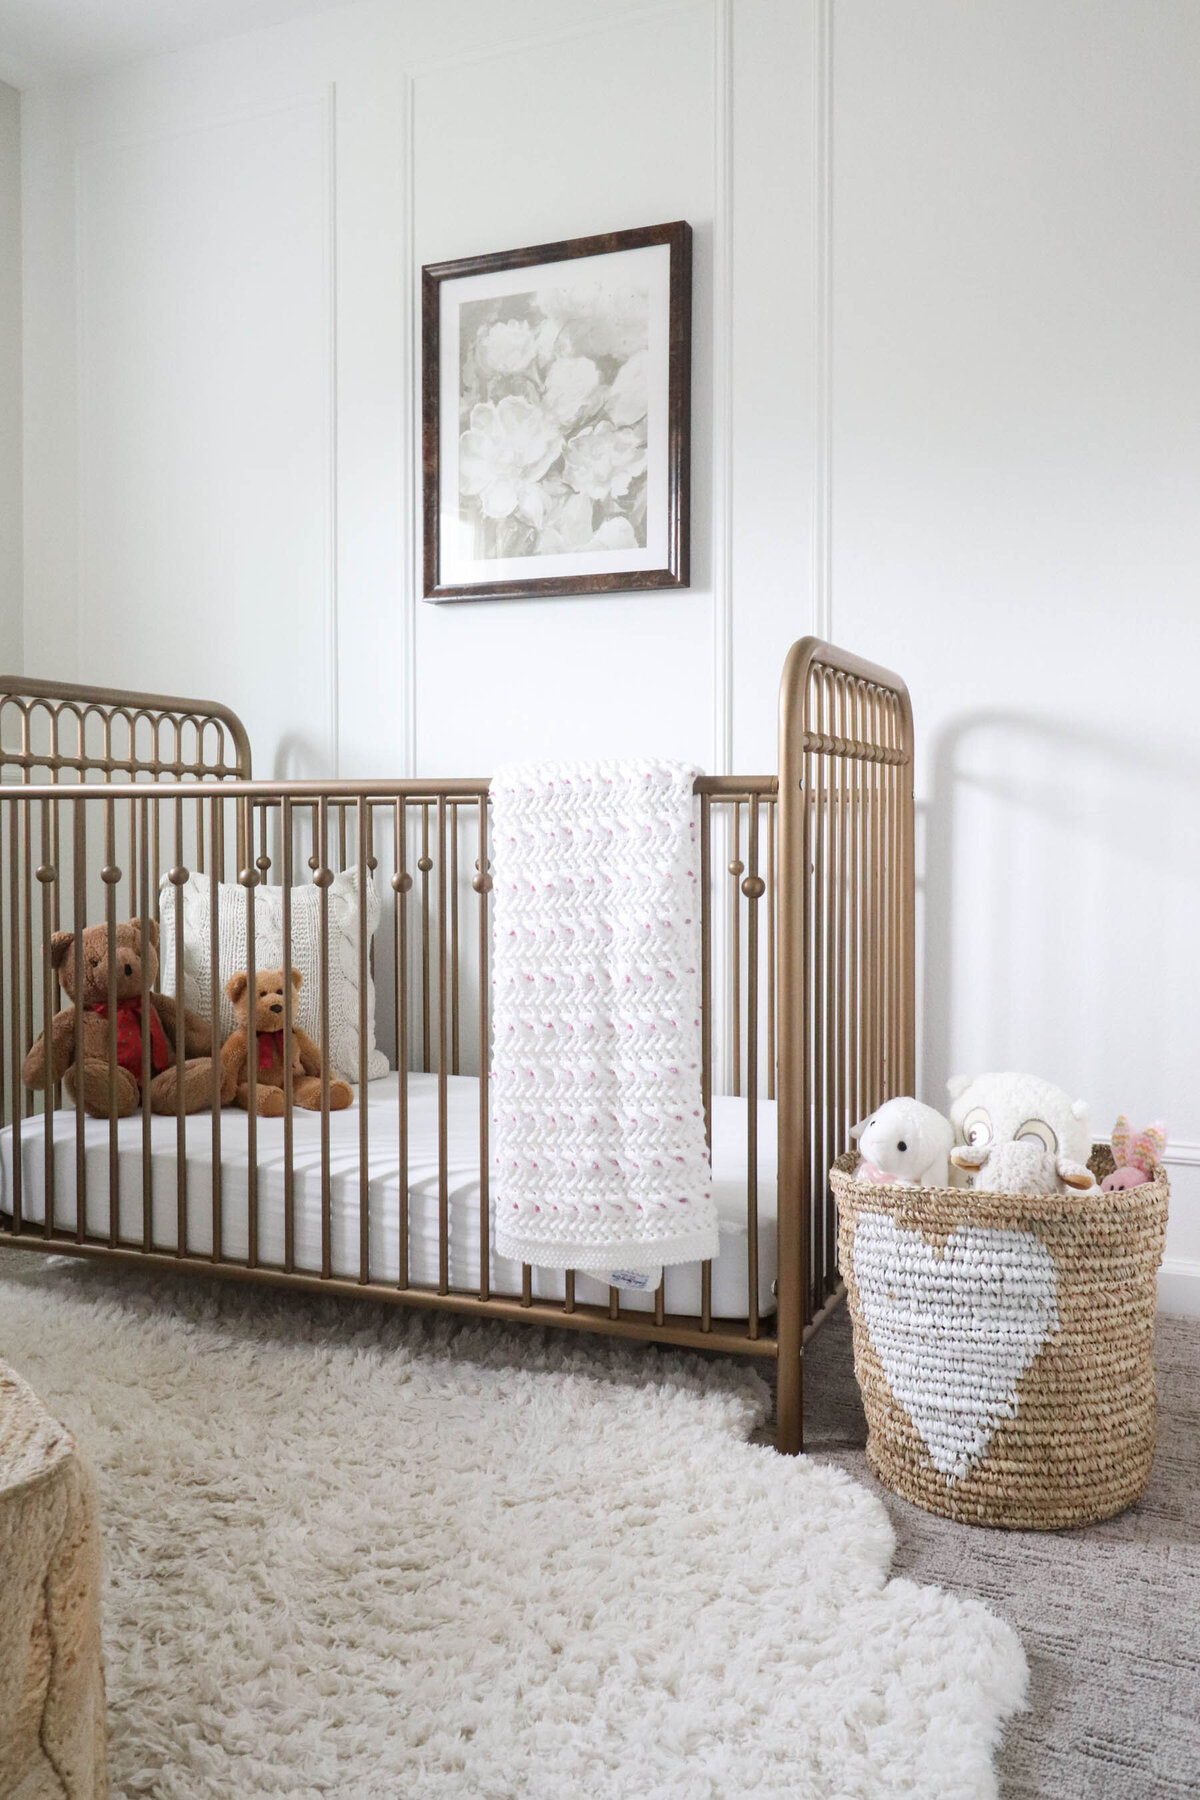 Ania's Nursery Reveal by The Wood Grain Cottage-23